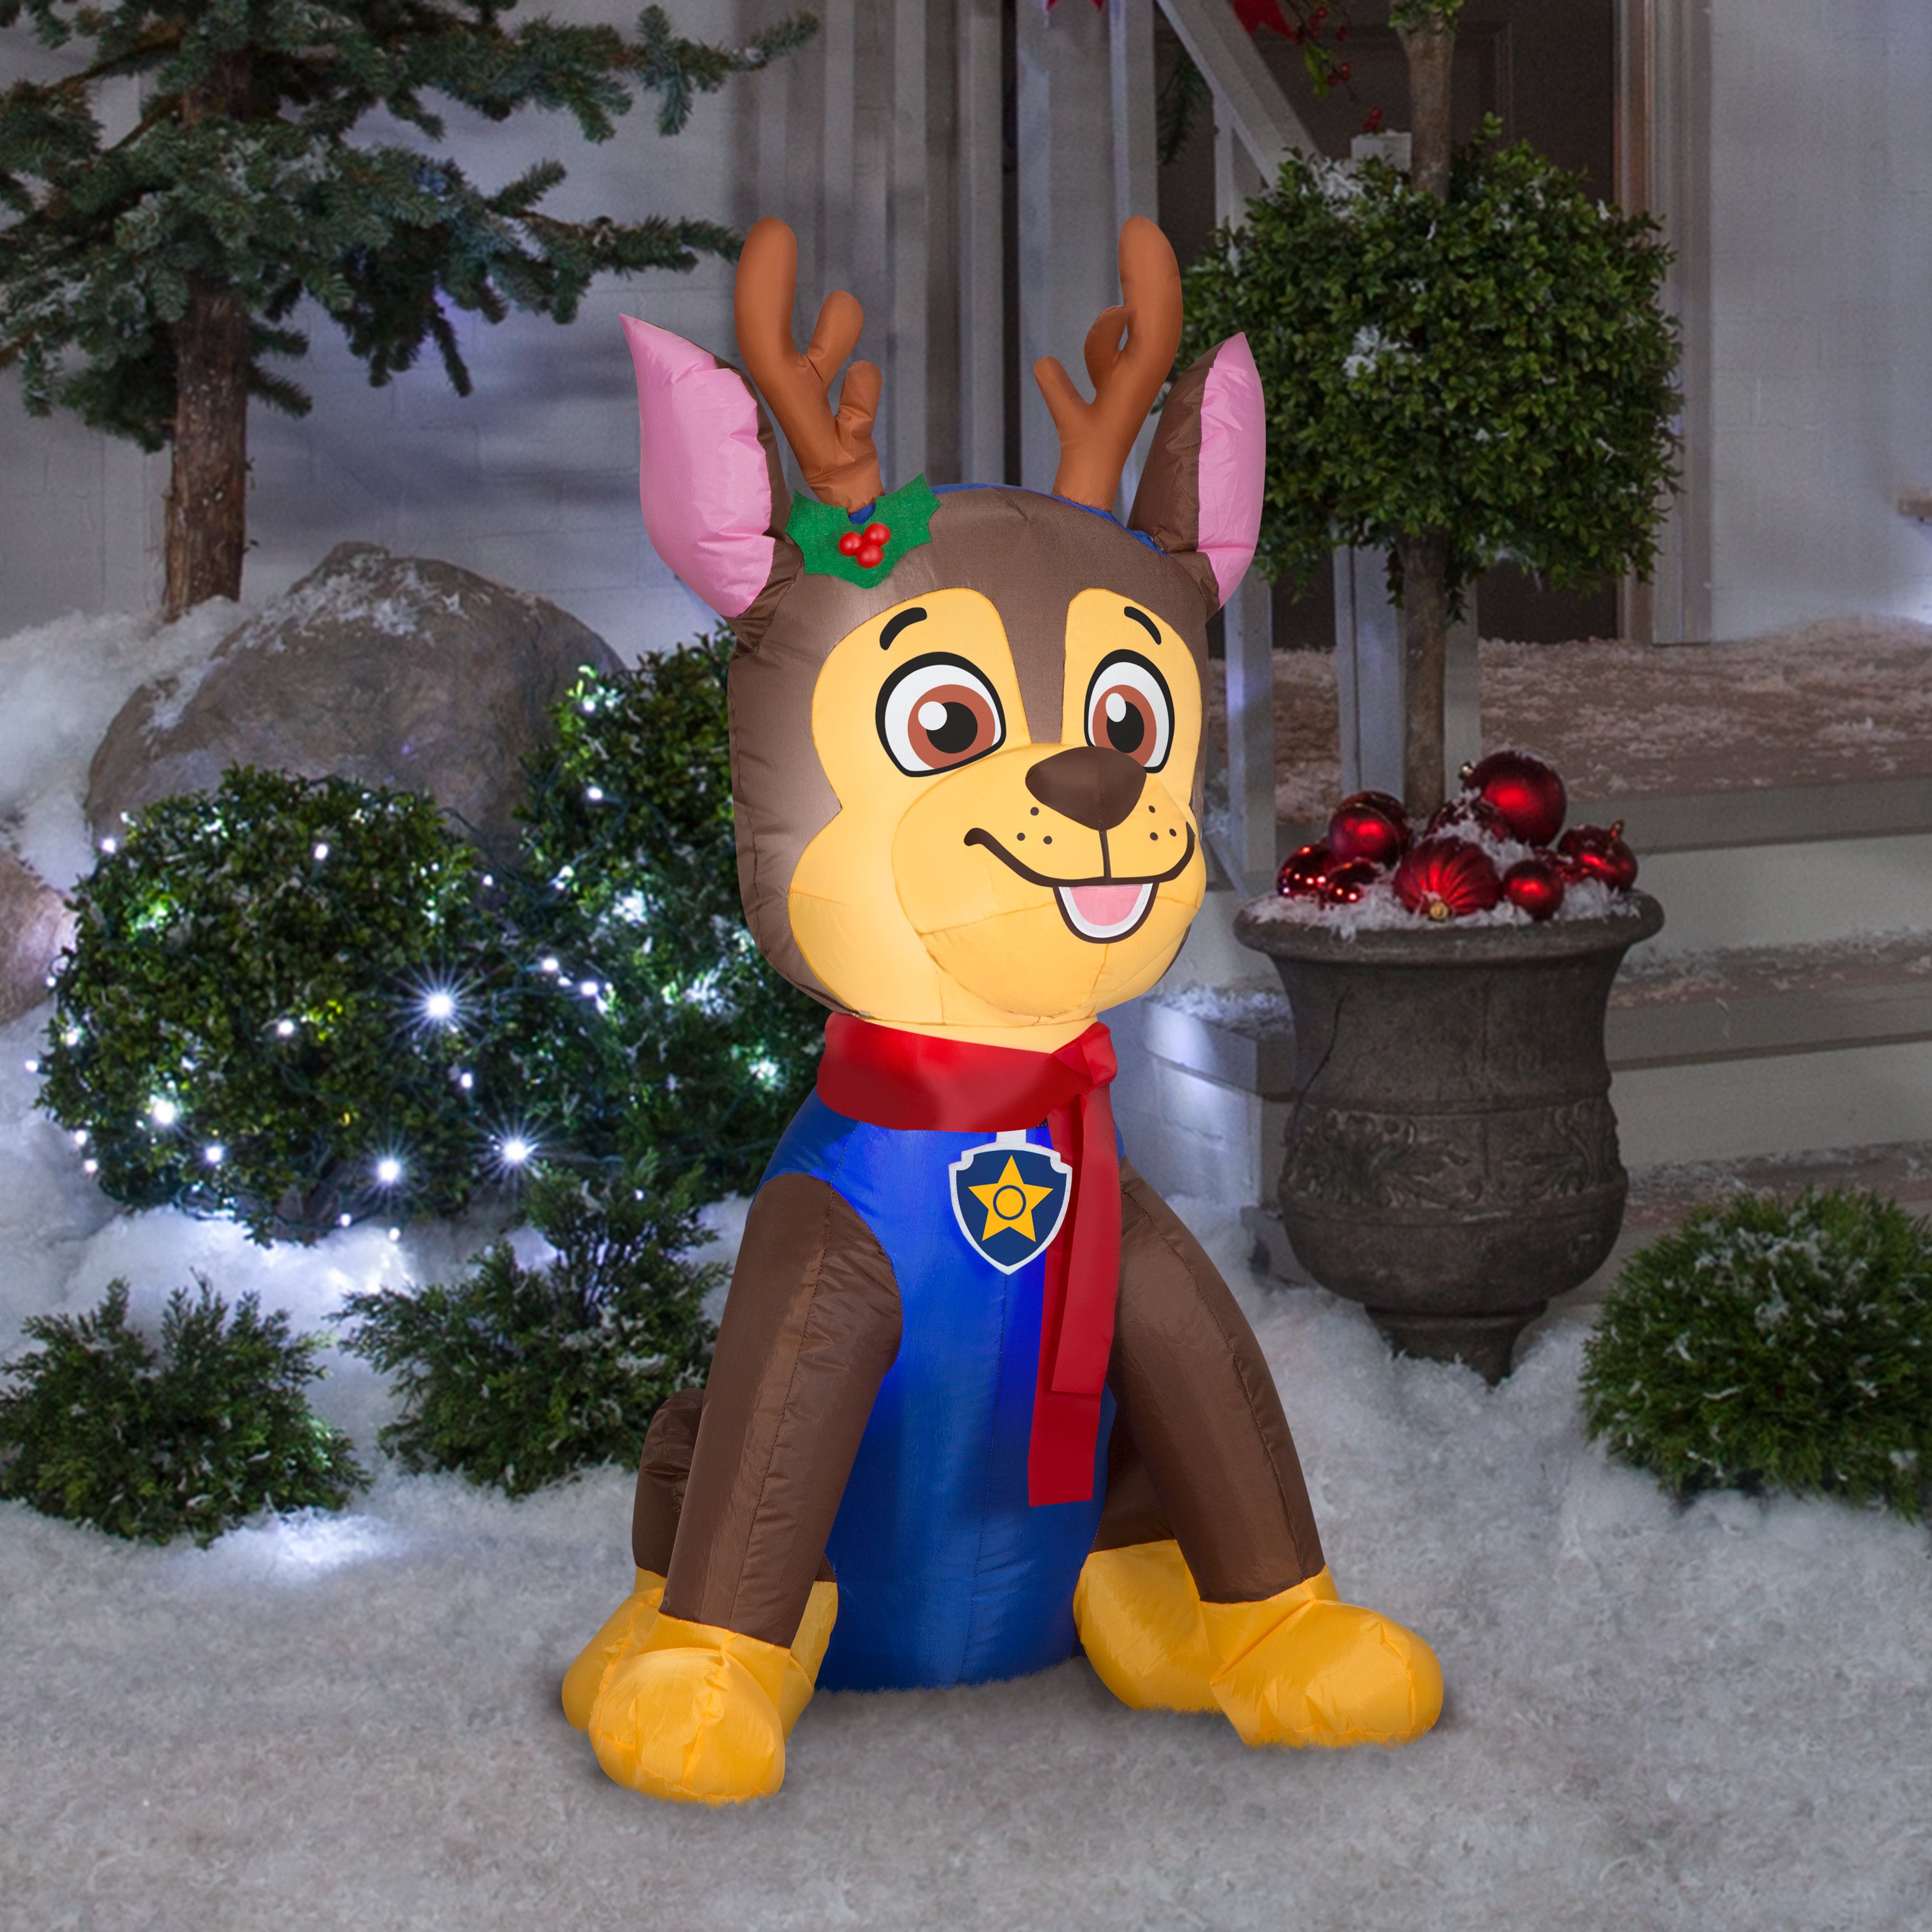 Gemmy Christmas Airblown Inflatable Chase w/Antlers and Scarf Nick, 3.5 ft Tall, Brown